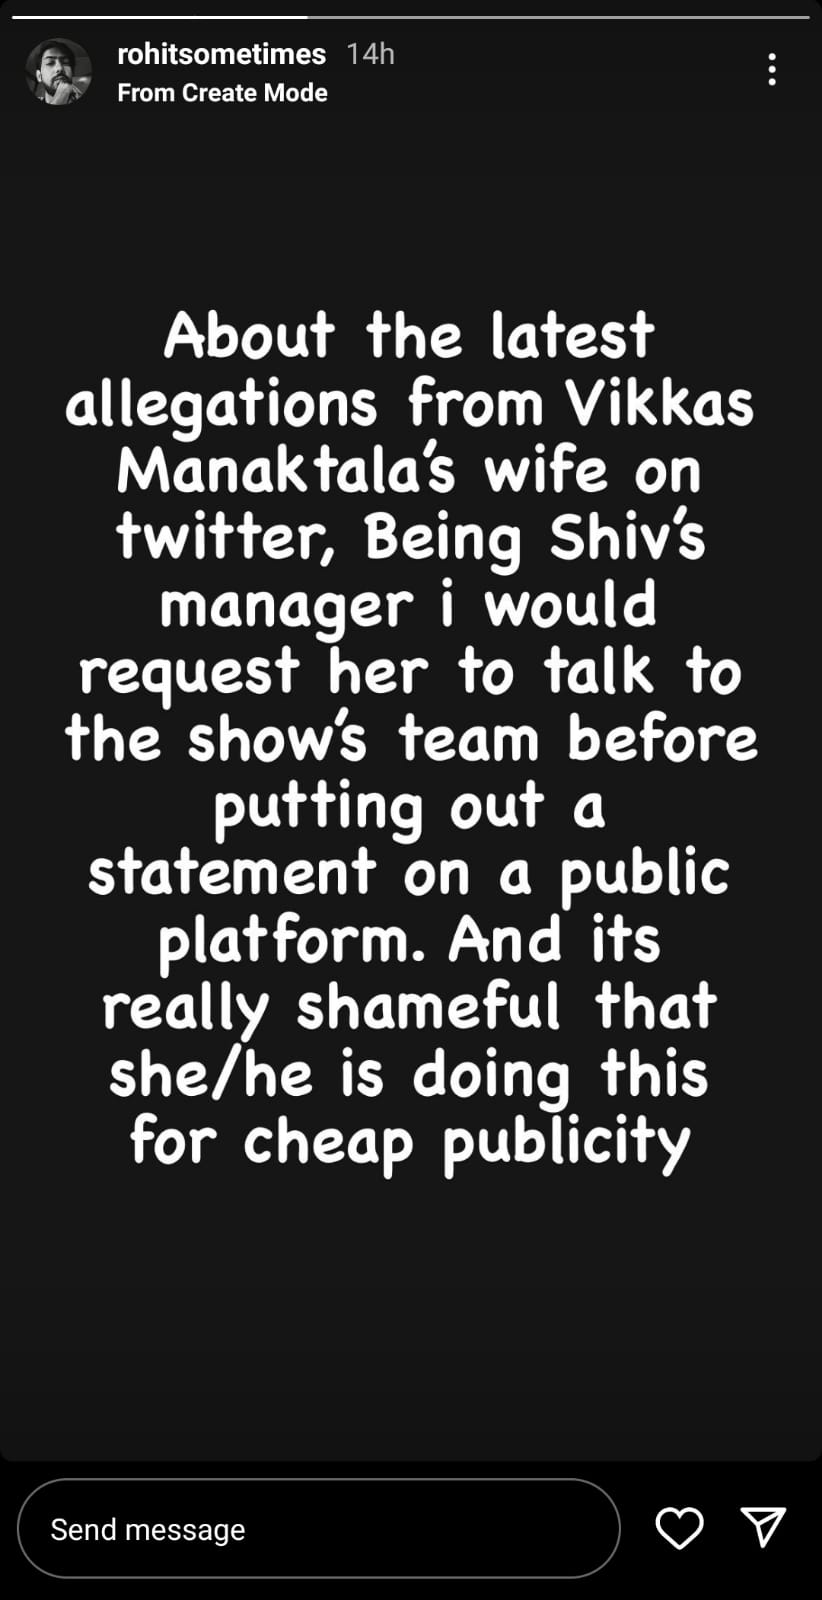 Shiv's manager replied to the allegations made by Vikkas Manaktala's wife